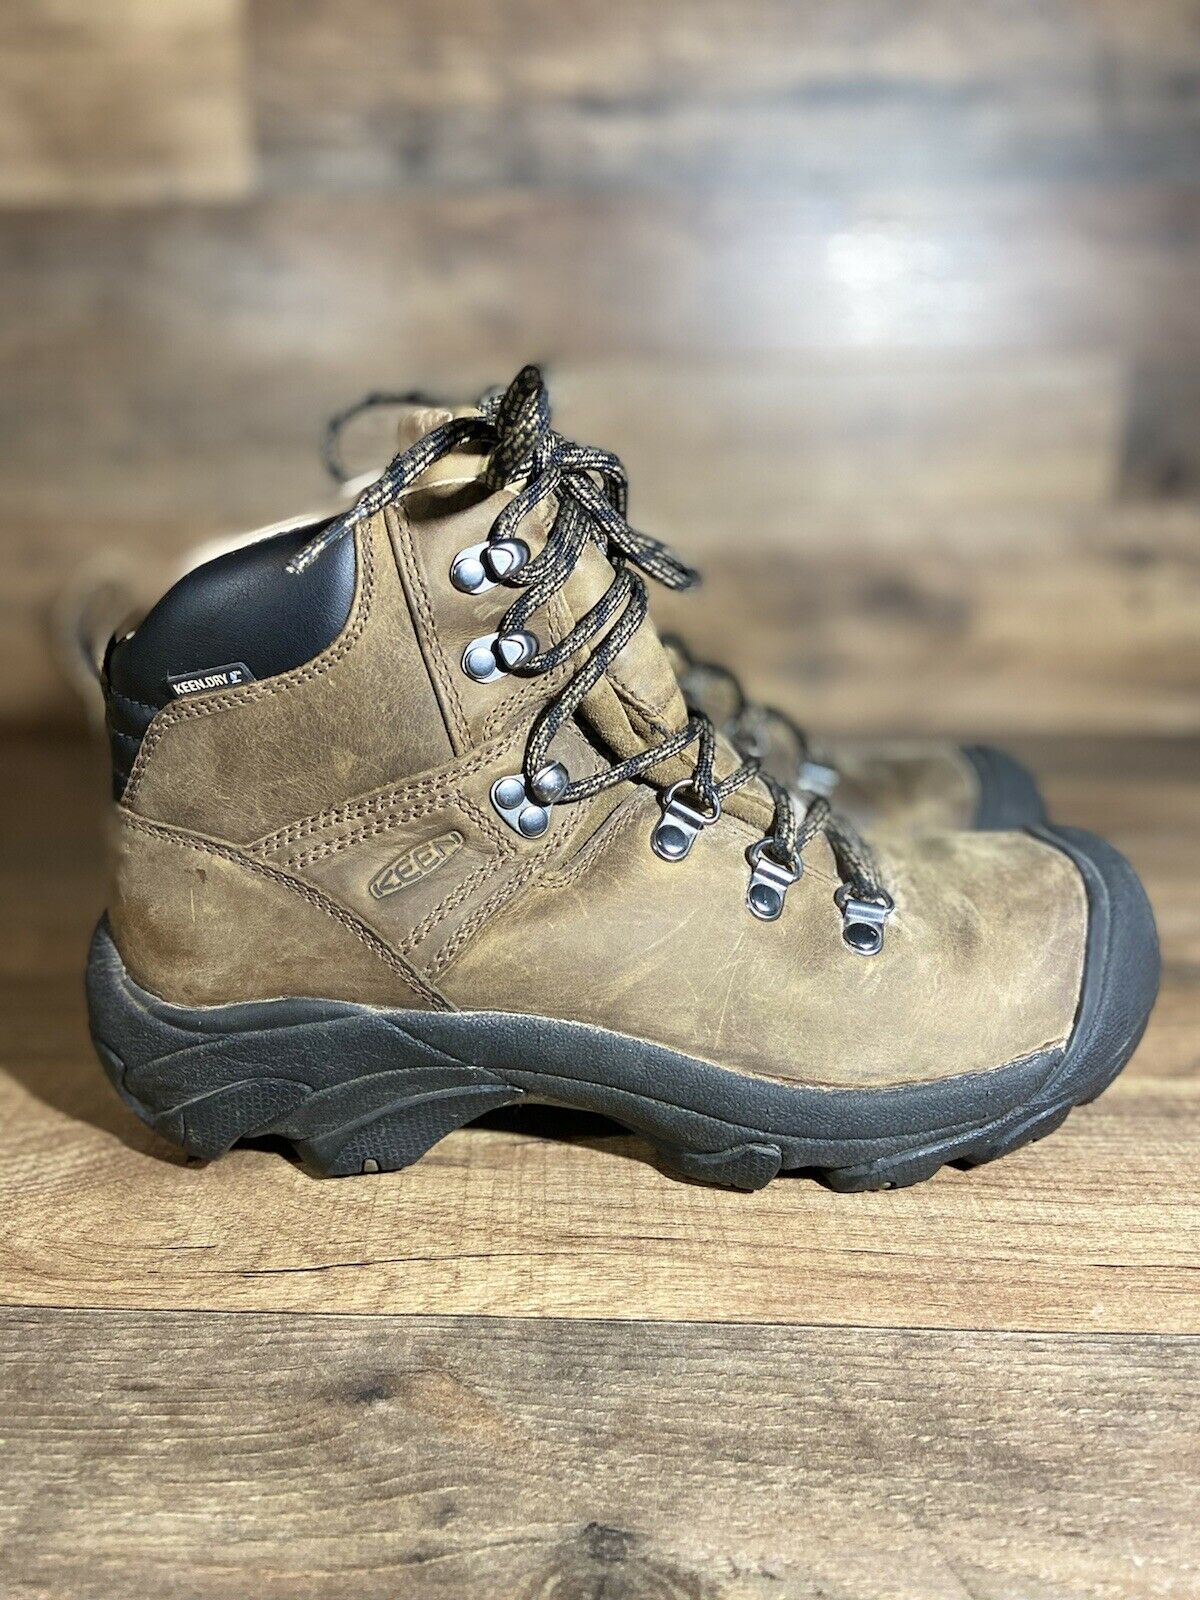 Keen Pyrenees Hiking Boots Women's Size 9 US Bison Brown 39.5 Eu Keen Dry